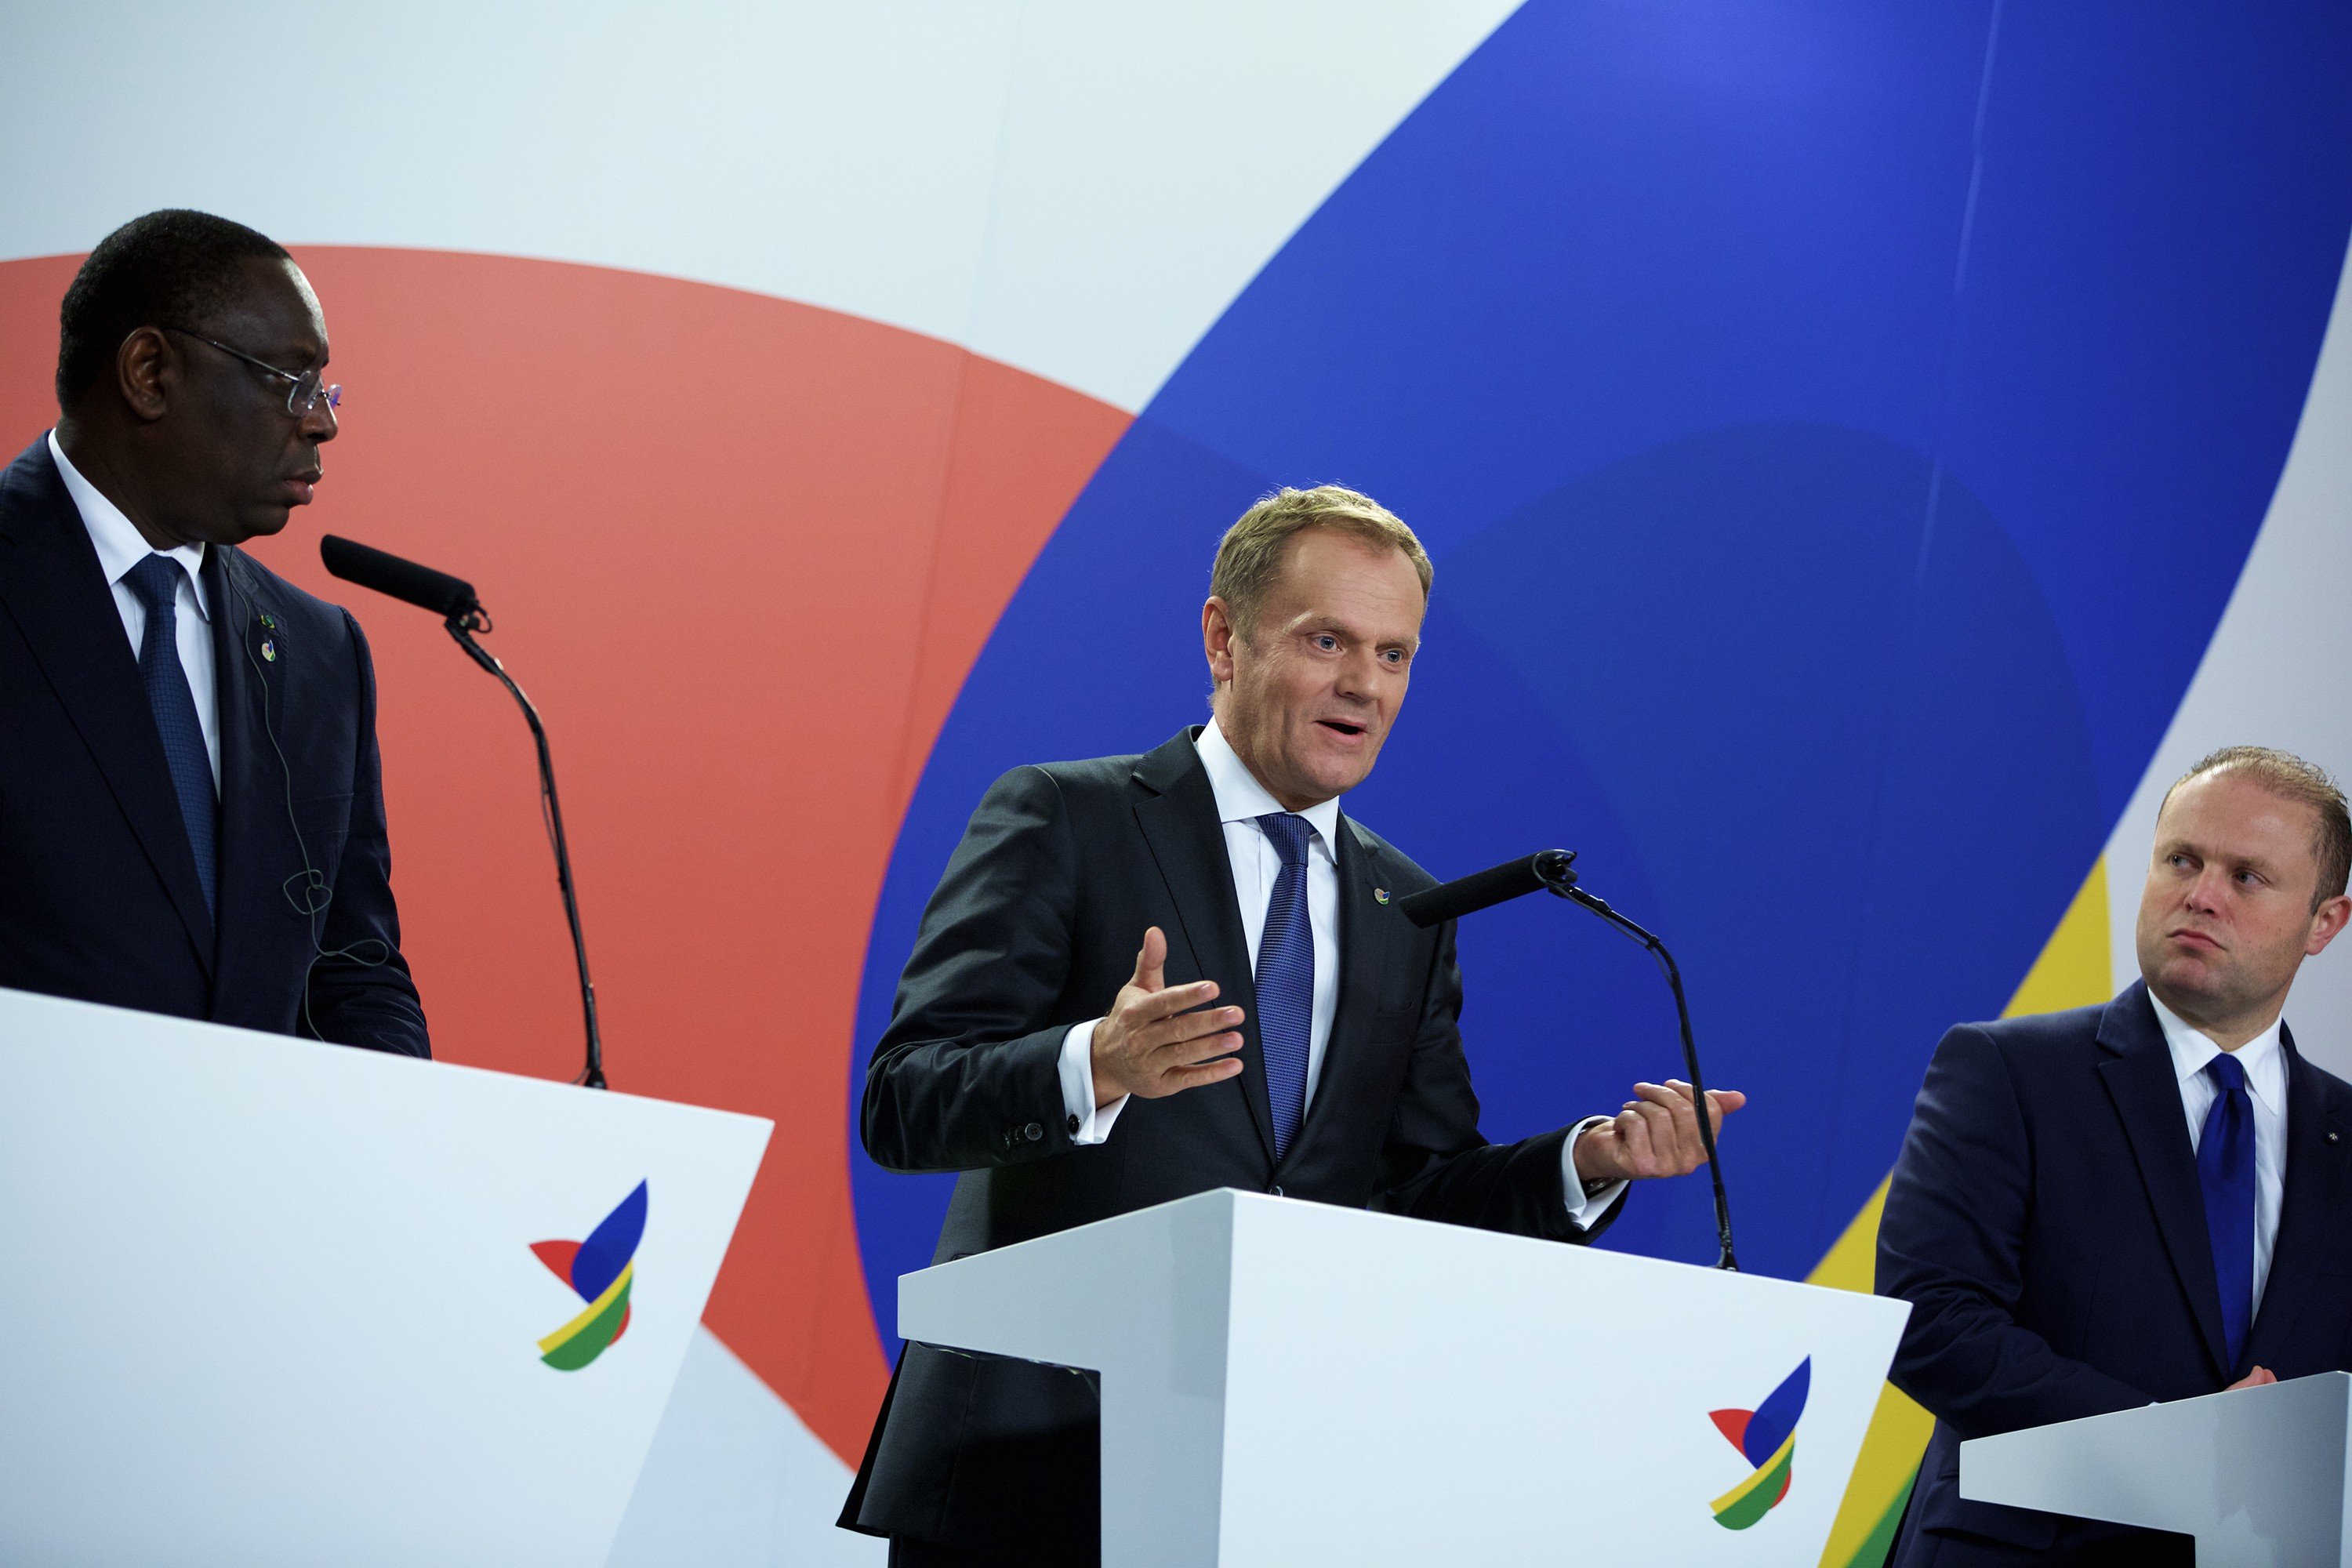 President of the European Council Donald Tusk speaks at the press conference with Prime Minister of Malta Joseph Muscat (L) and President of Senegal Macky Sall (R) following a two-day summit on migration that ended in Valletta, Malta, on Nov. 12, 2015. (Jin Yu—Xinhua Press/Corbis)